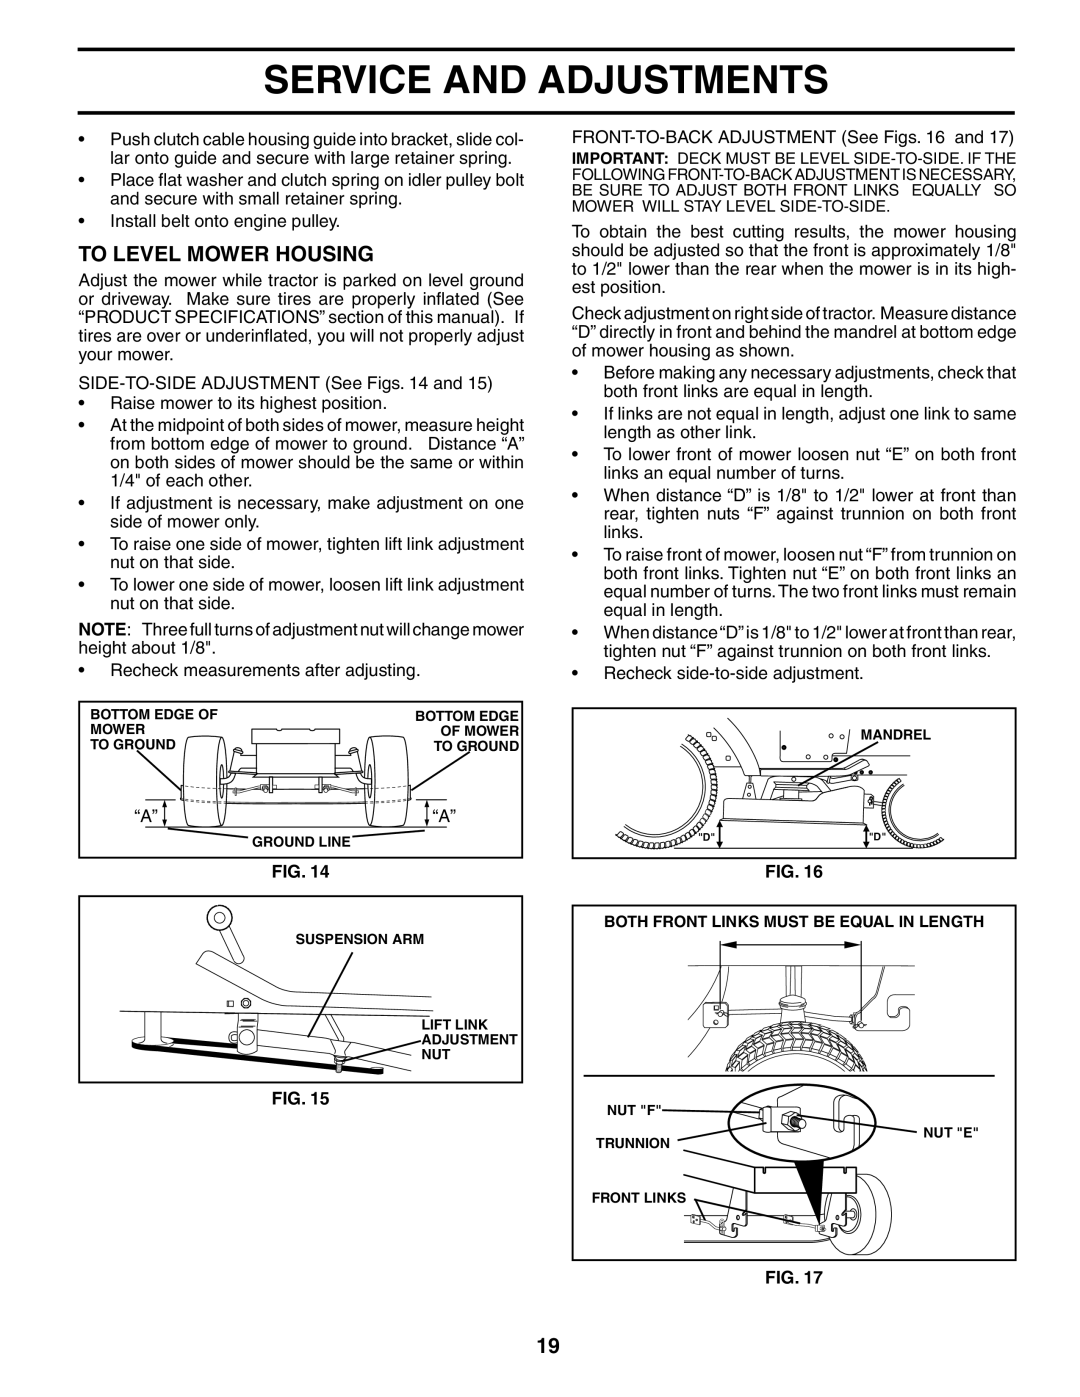 Poulan PO13T38A manual To Level Mower Housing, FRONT-TO-BACK Adjustment See Figs 